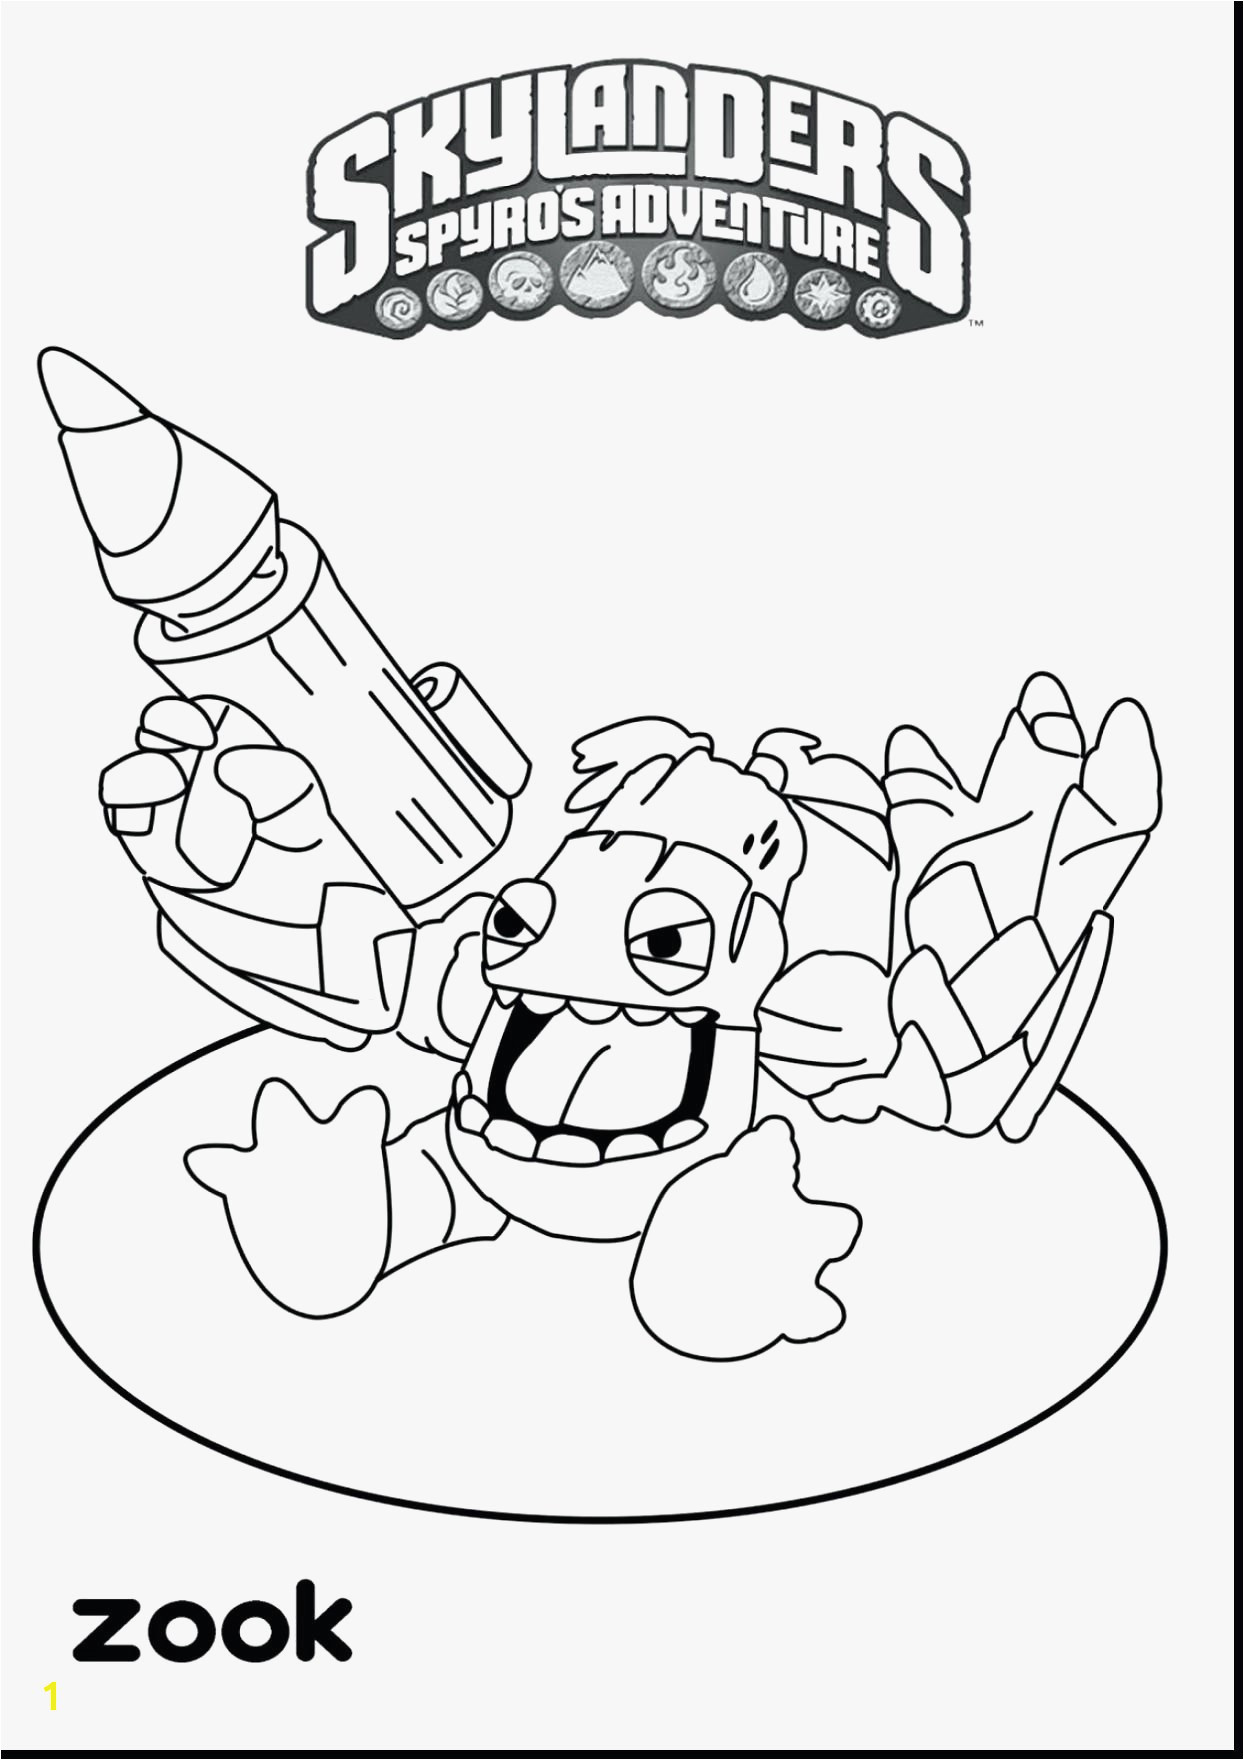 R Coloring Page Lovely Book Coloring Pages Best sol R Coloring Pages Best 0d – Fun